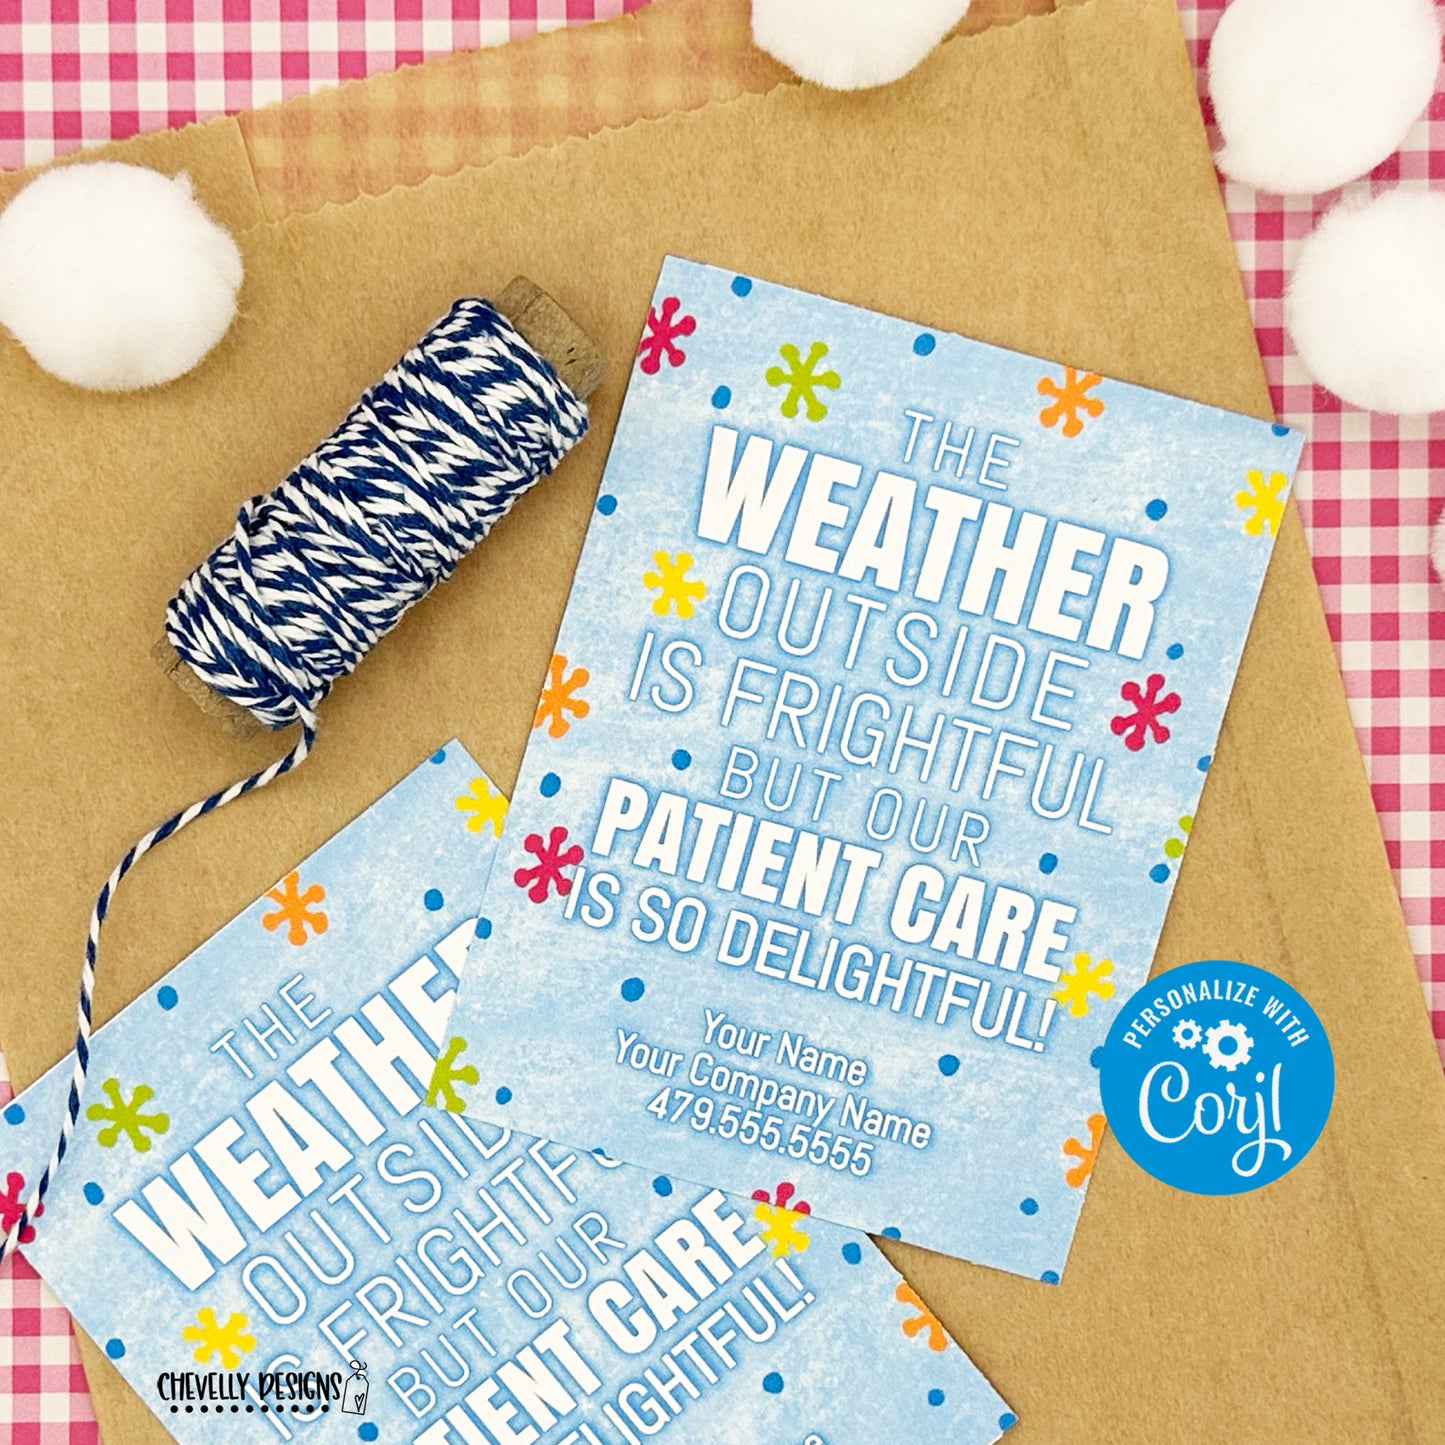 EDITABLE - Weather Outside is Frightful - Patient Care is Delightful - Christmas Business Referral Gift Tags - Printable Digital File